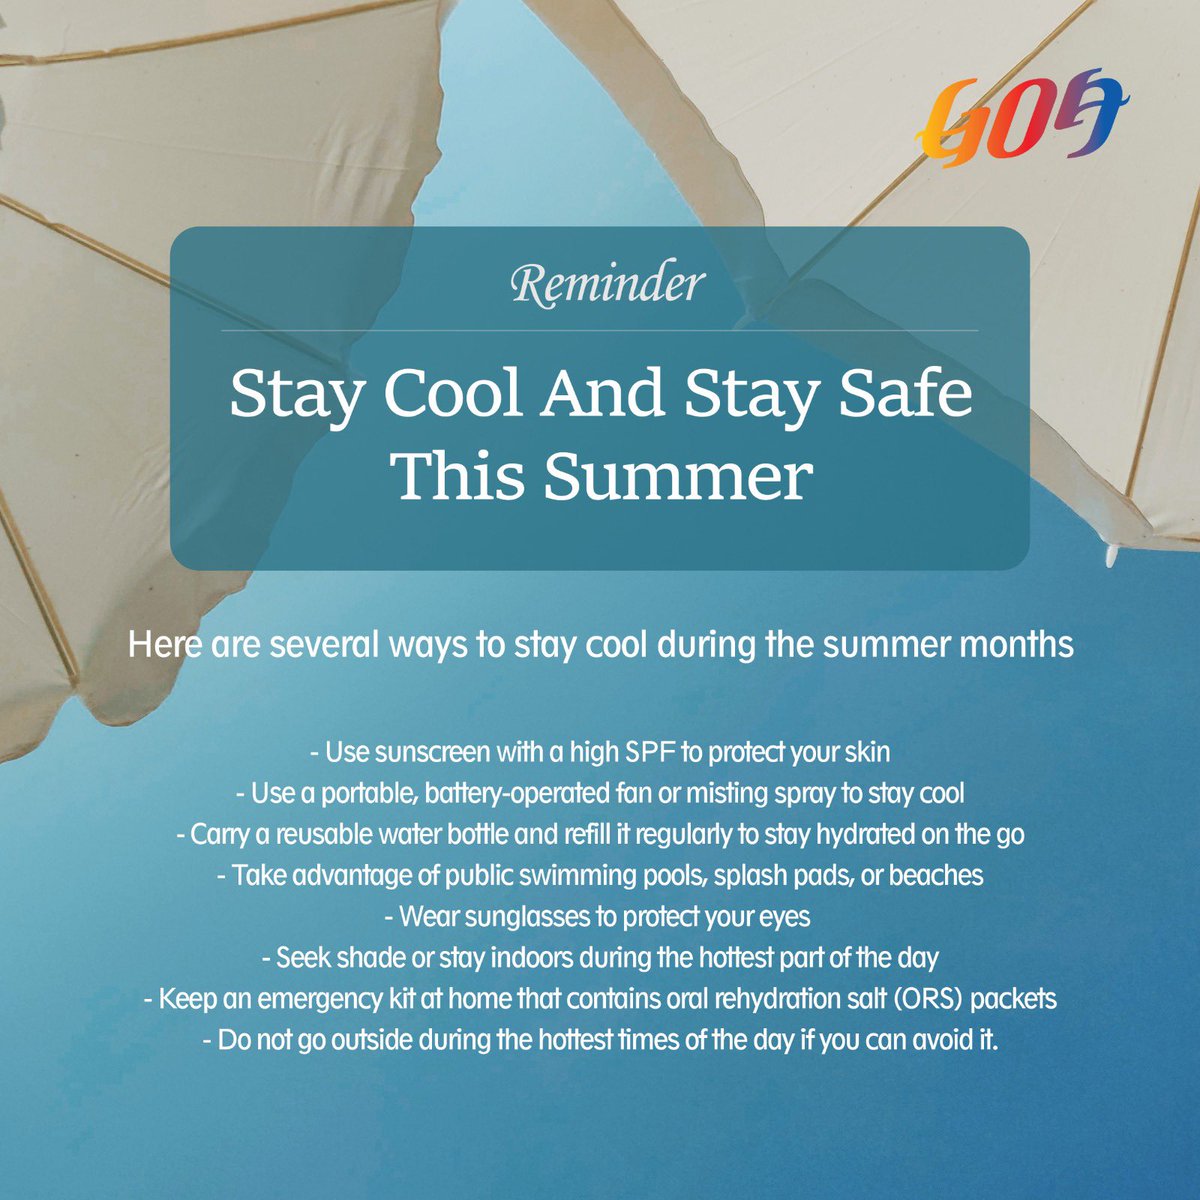 Stay safe, stay cool! ☀ As temperatures soar, remember to take precautions during the heat wave. Stay hydrated, seek shade, and limit outdoor activities during peak hours. Let’s beat the heat together! #GoaTourism #Heatwave #SummerinGoa #Heatwaveprecautions #BeattheHeat